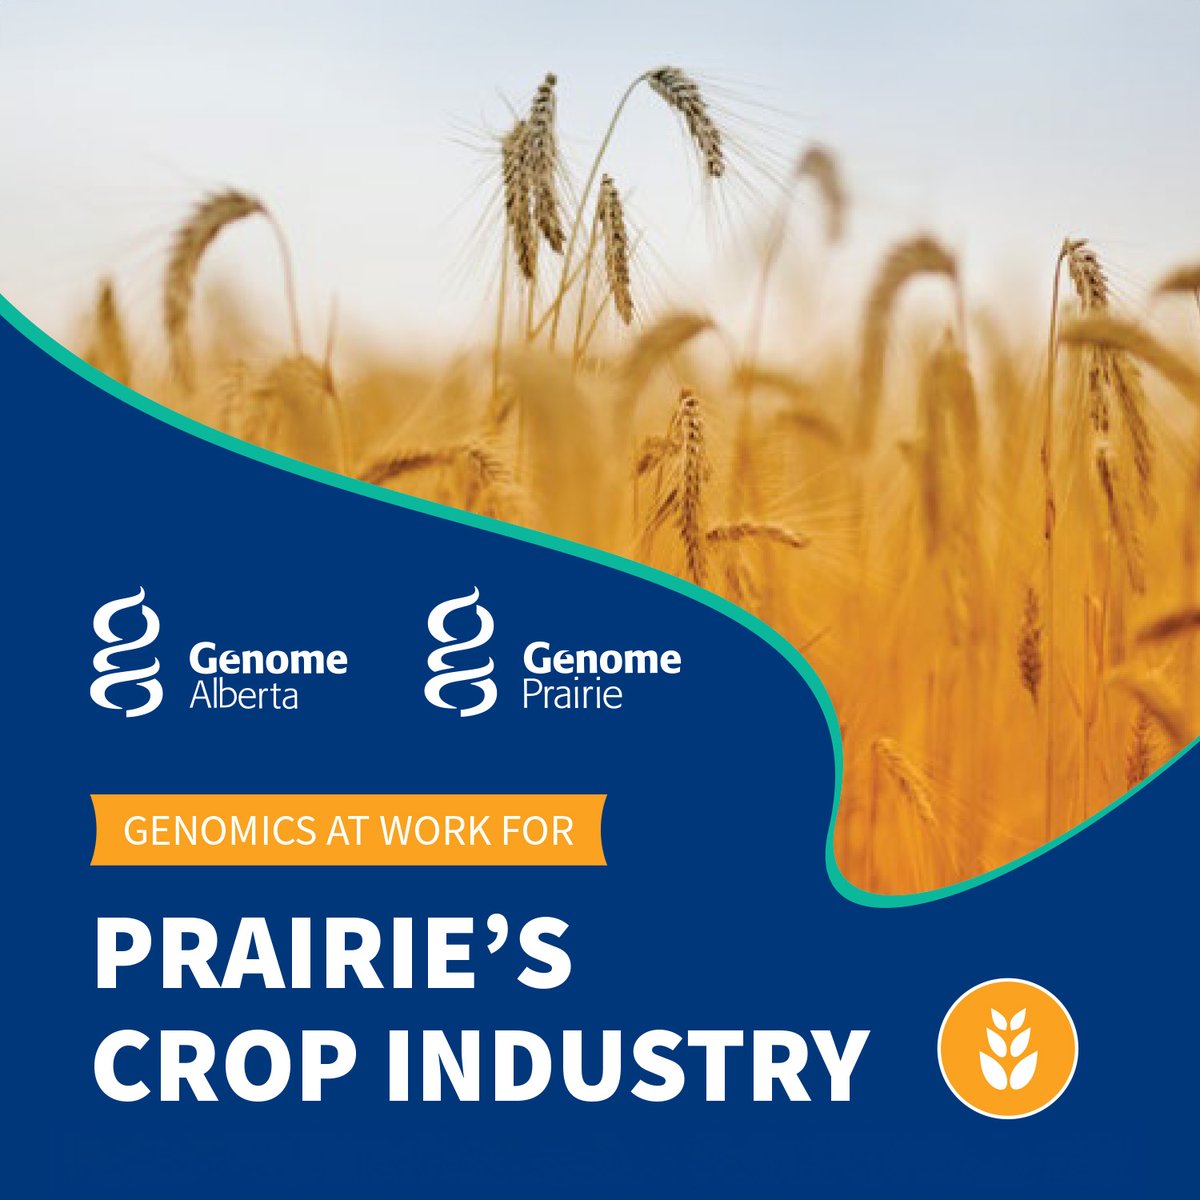 GIFS' Nancy Tout is participating in a @GenomeAlberta and @GenomePrairie workshop next week that will explore genomics technologies for crop improvement. Details and registration below. ow.ly/18ua50QLXIJ